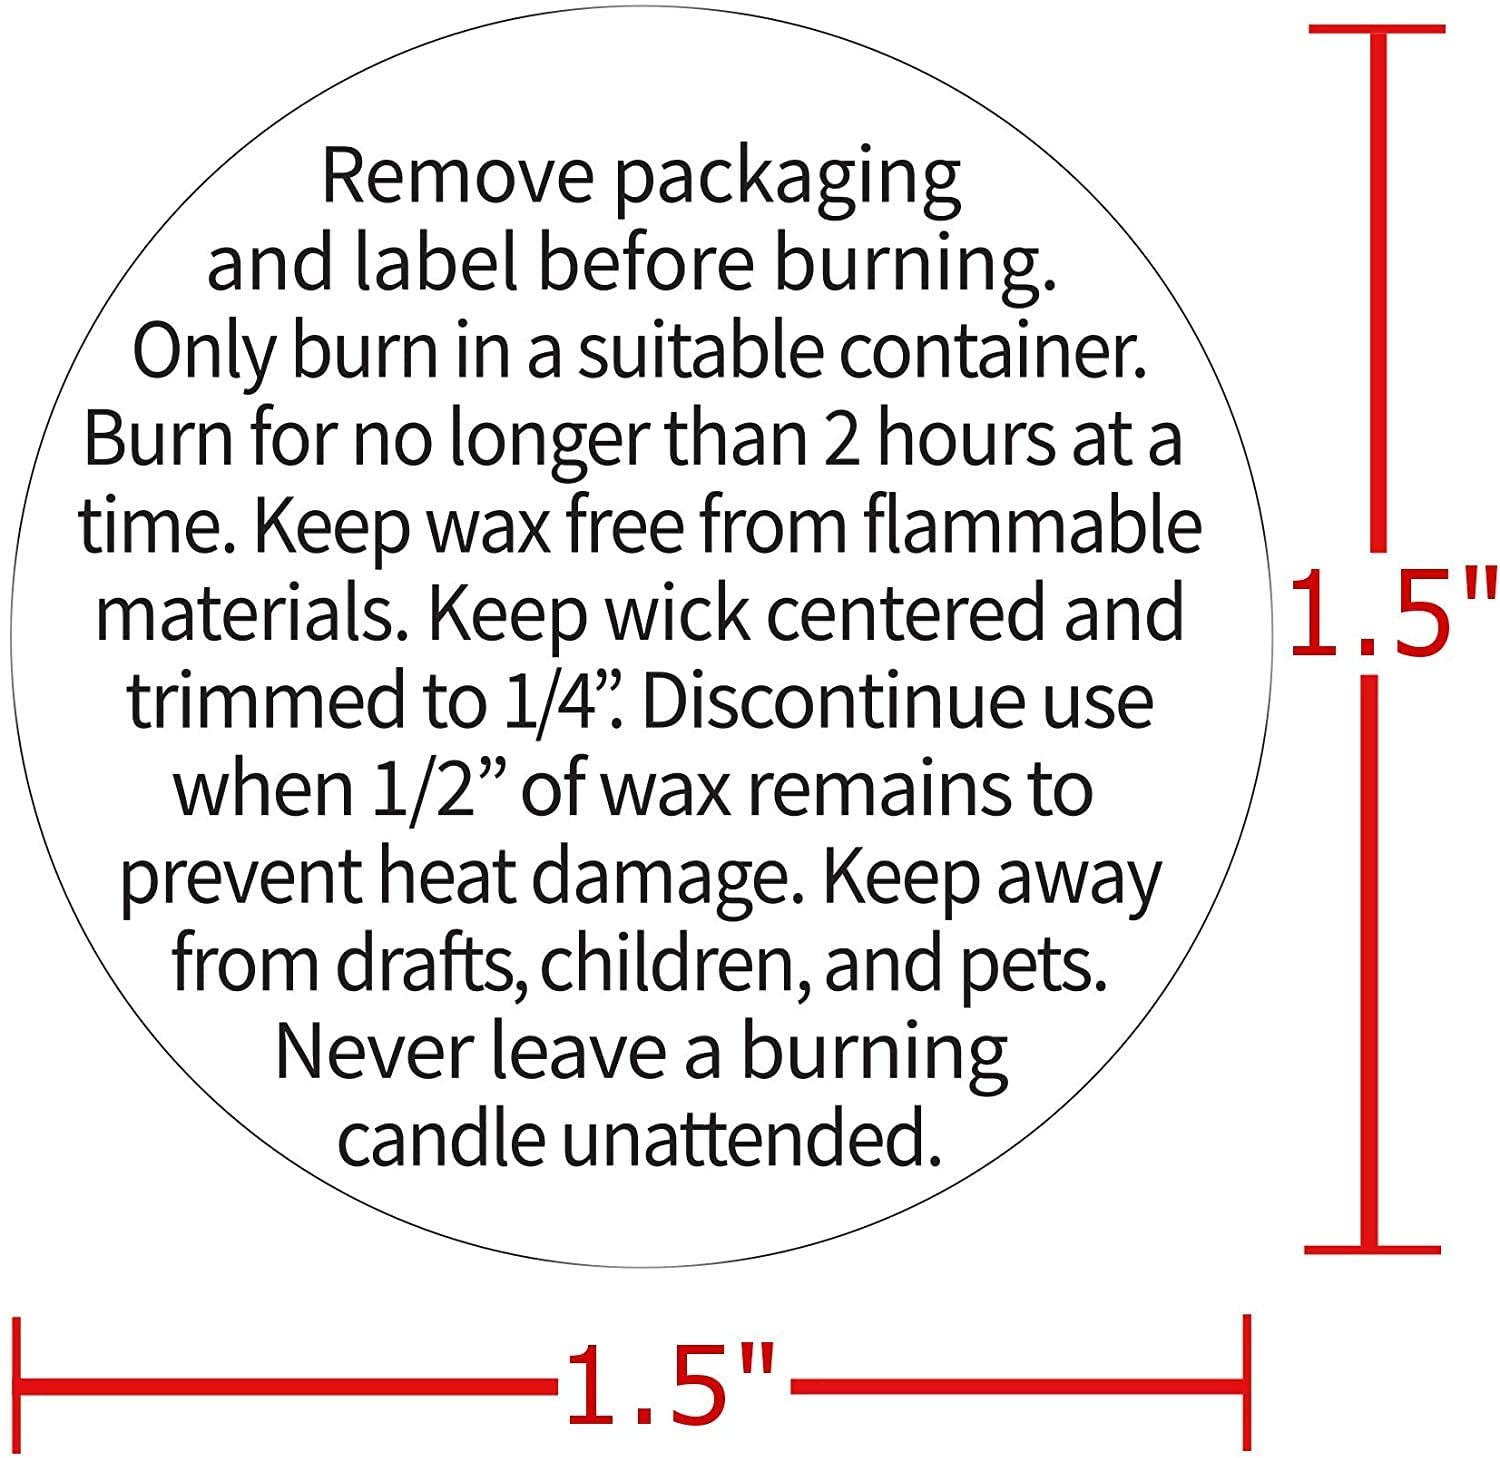 Candle Warning Stickers, 1.5 inch Round Label, Sticker Decal for Candle Jars, Tins and Votives - 300 Labels